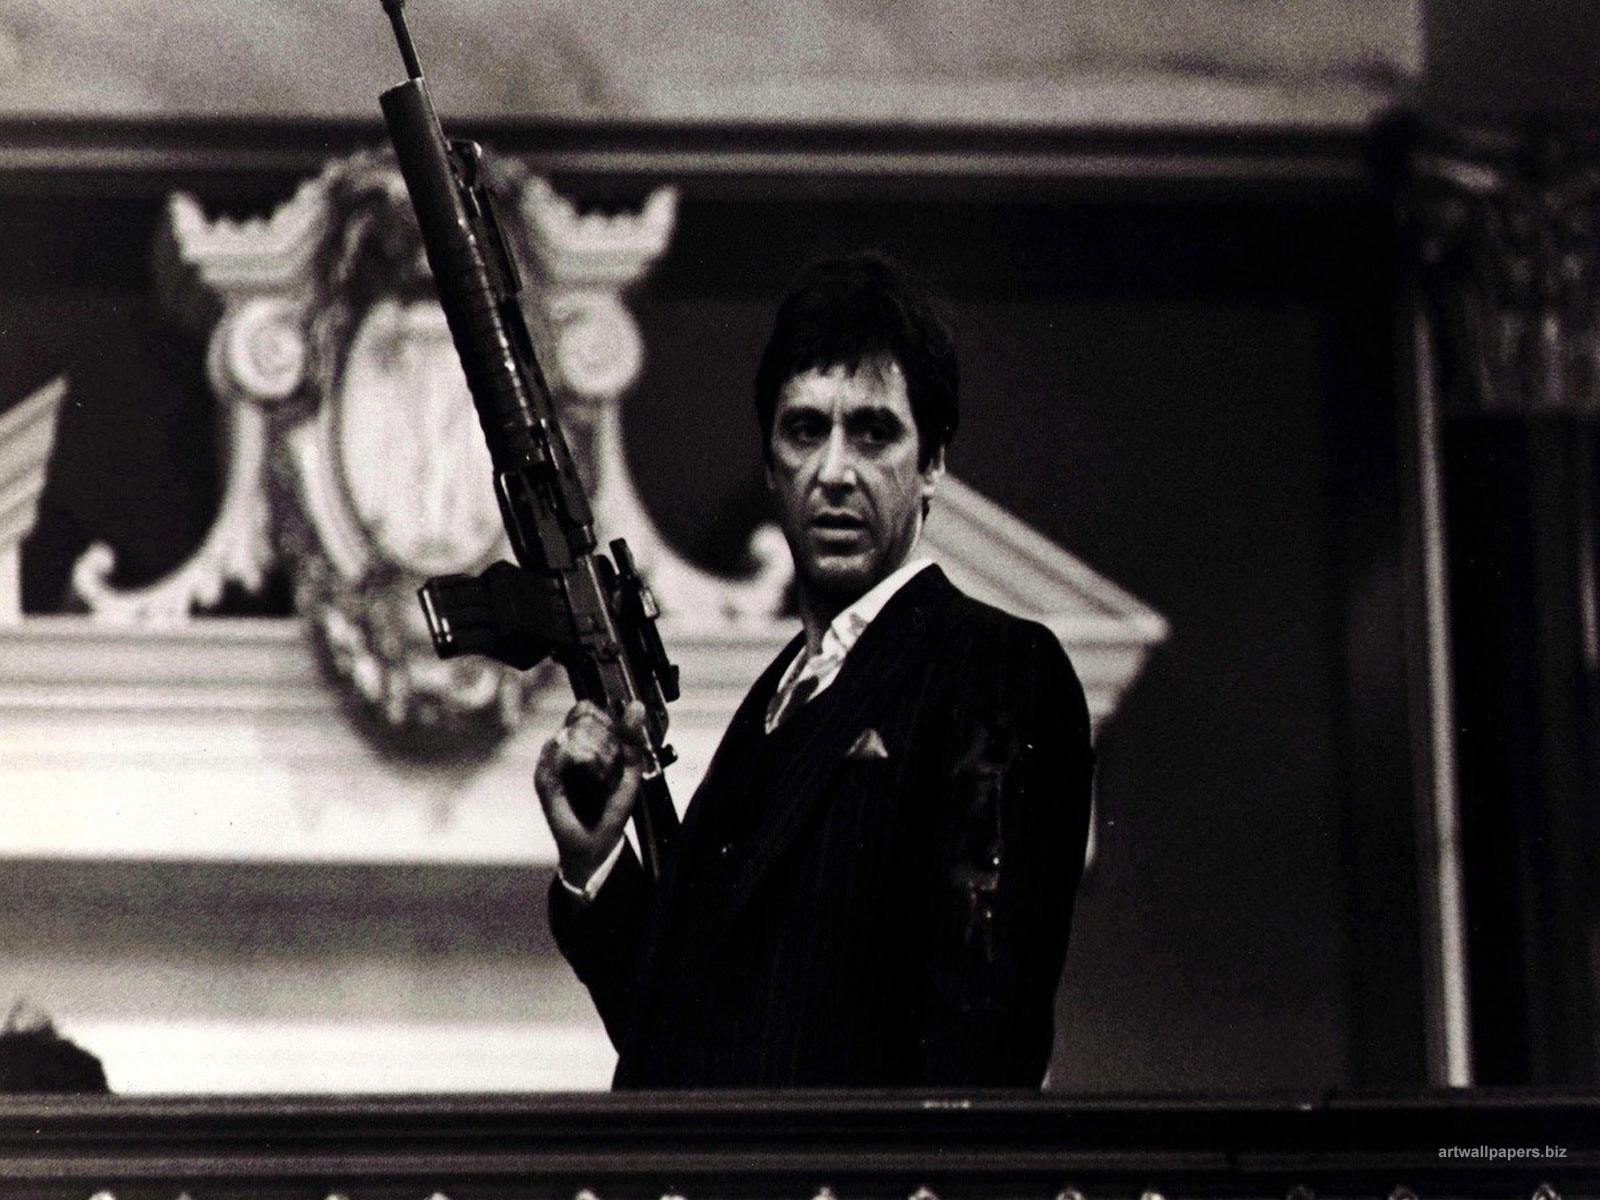 Free Download Hd Scarface Wallpaper 1600x10 For Your Desktop Mobile Tablet Explore 78 Scarface Backgrounds Scarface Phone Wallpaper Scarface Wallpapers Screensavers Scarface Wallpaper Frank S Office